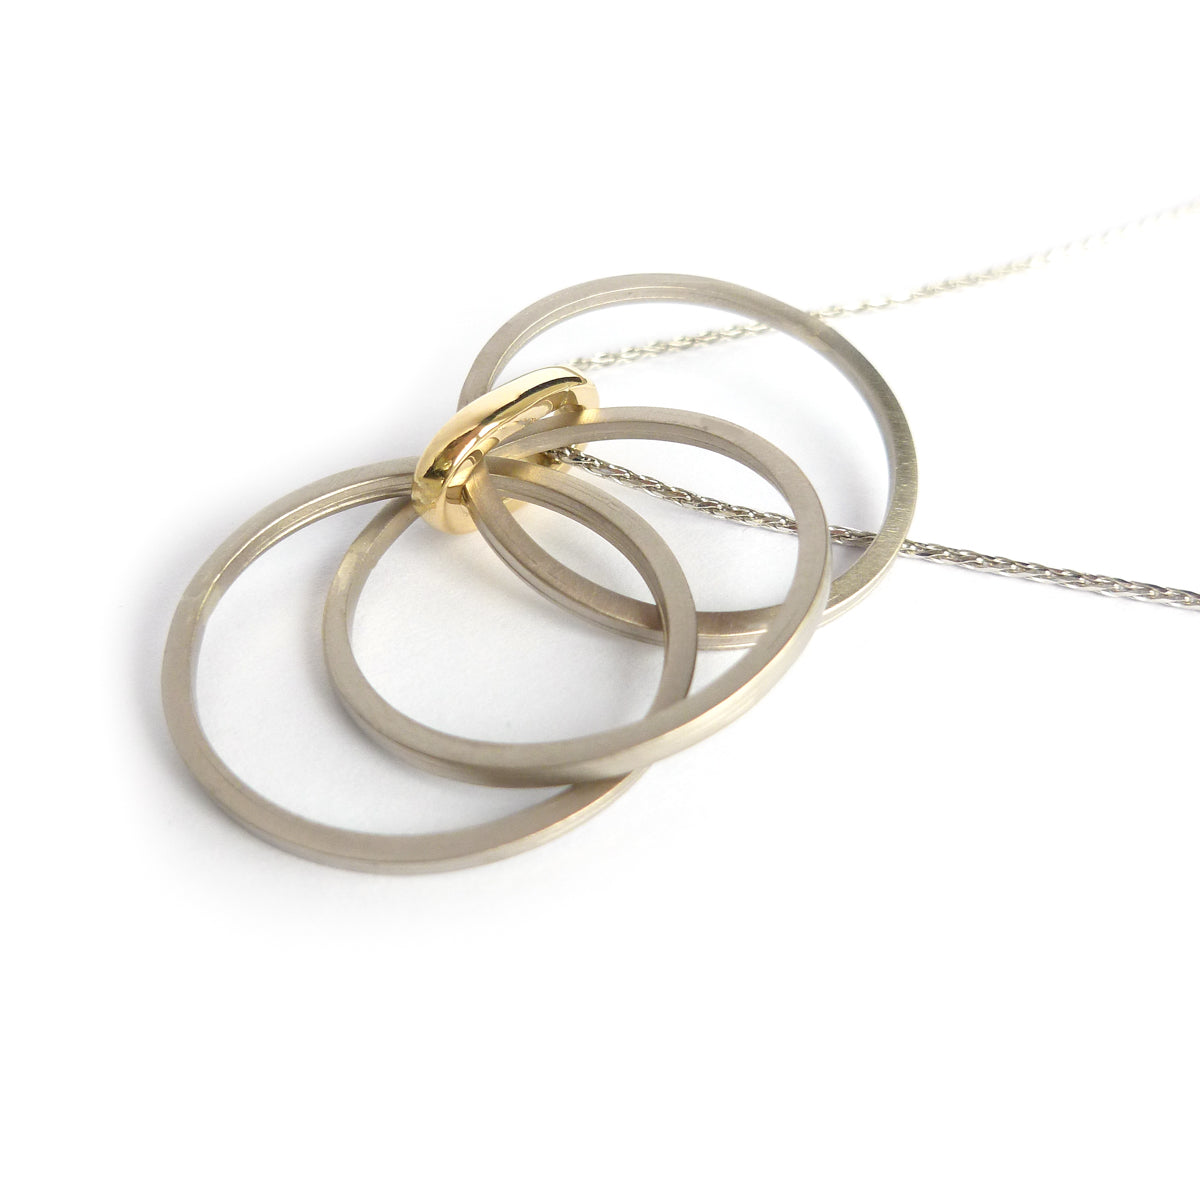 Contemporary jewellery, gold, bespoke and handmade necklace.